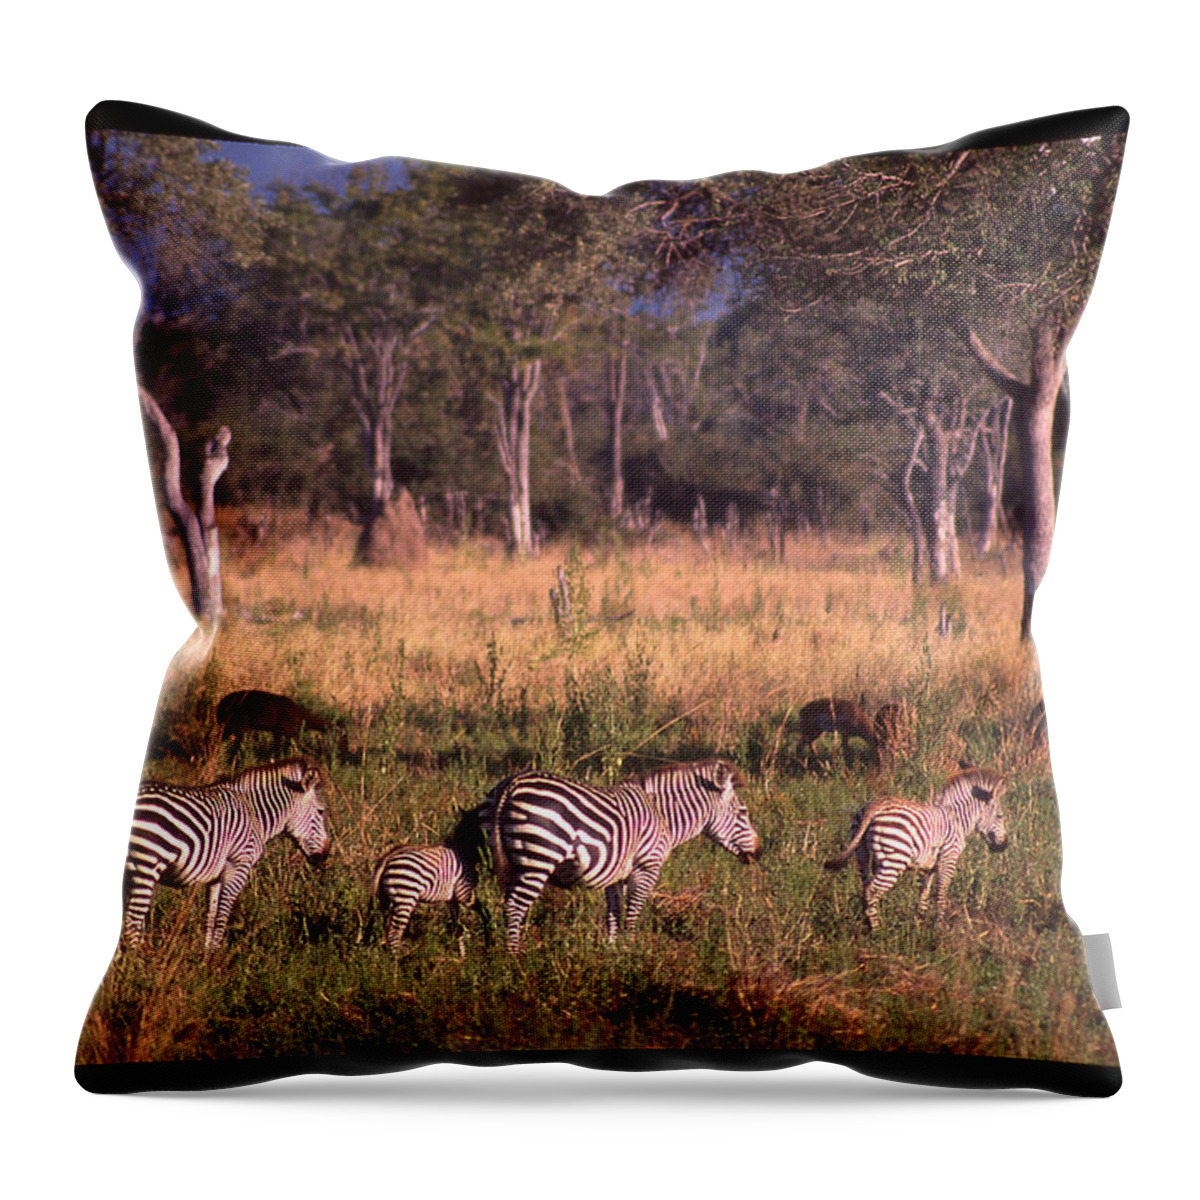 Africa Throw Pillow featuring the photograph Zebra Family Landscape by Russel Considine